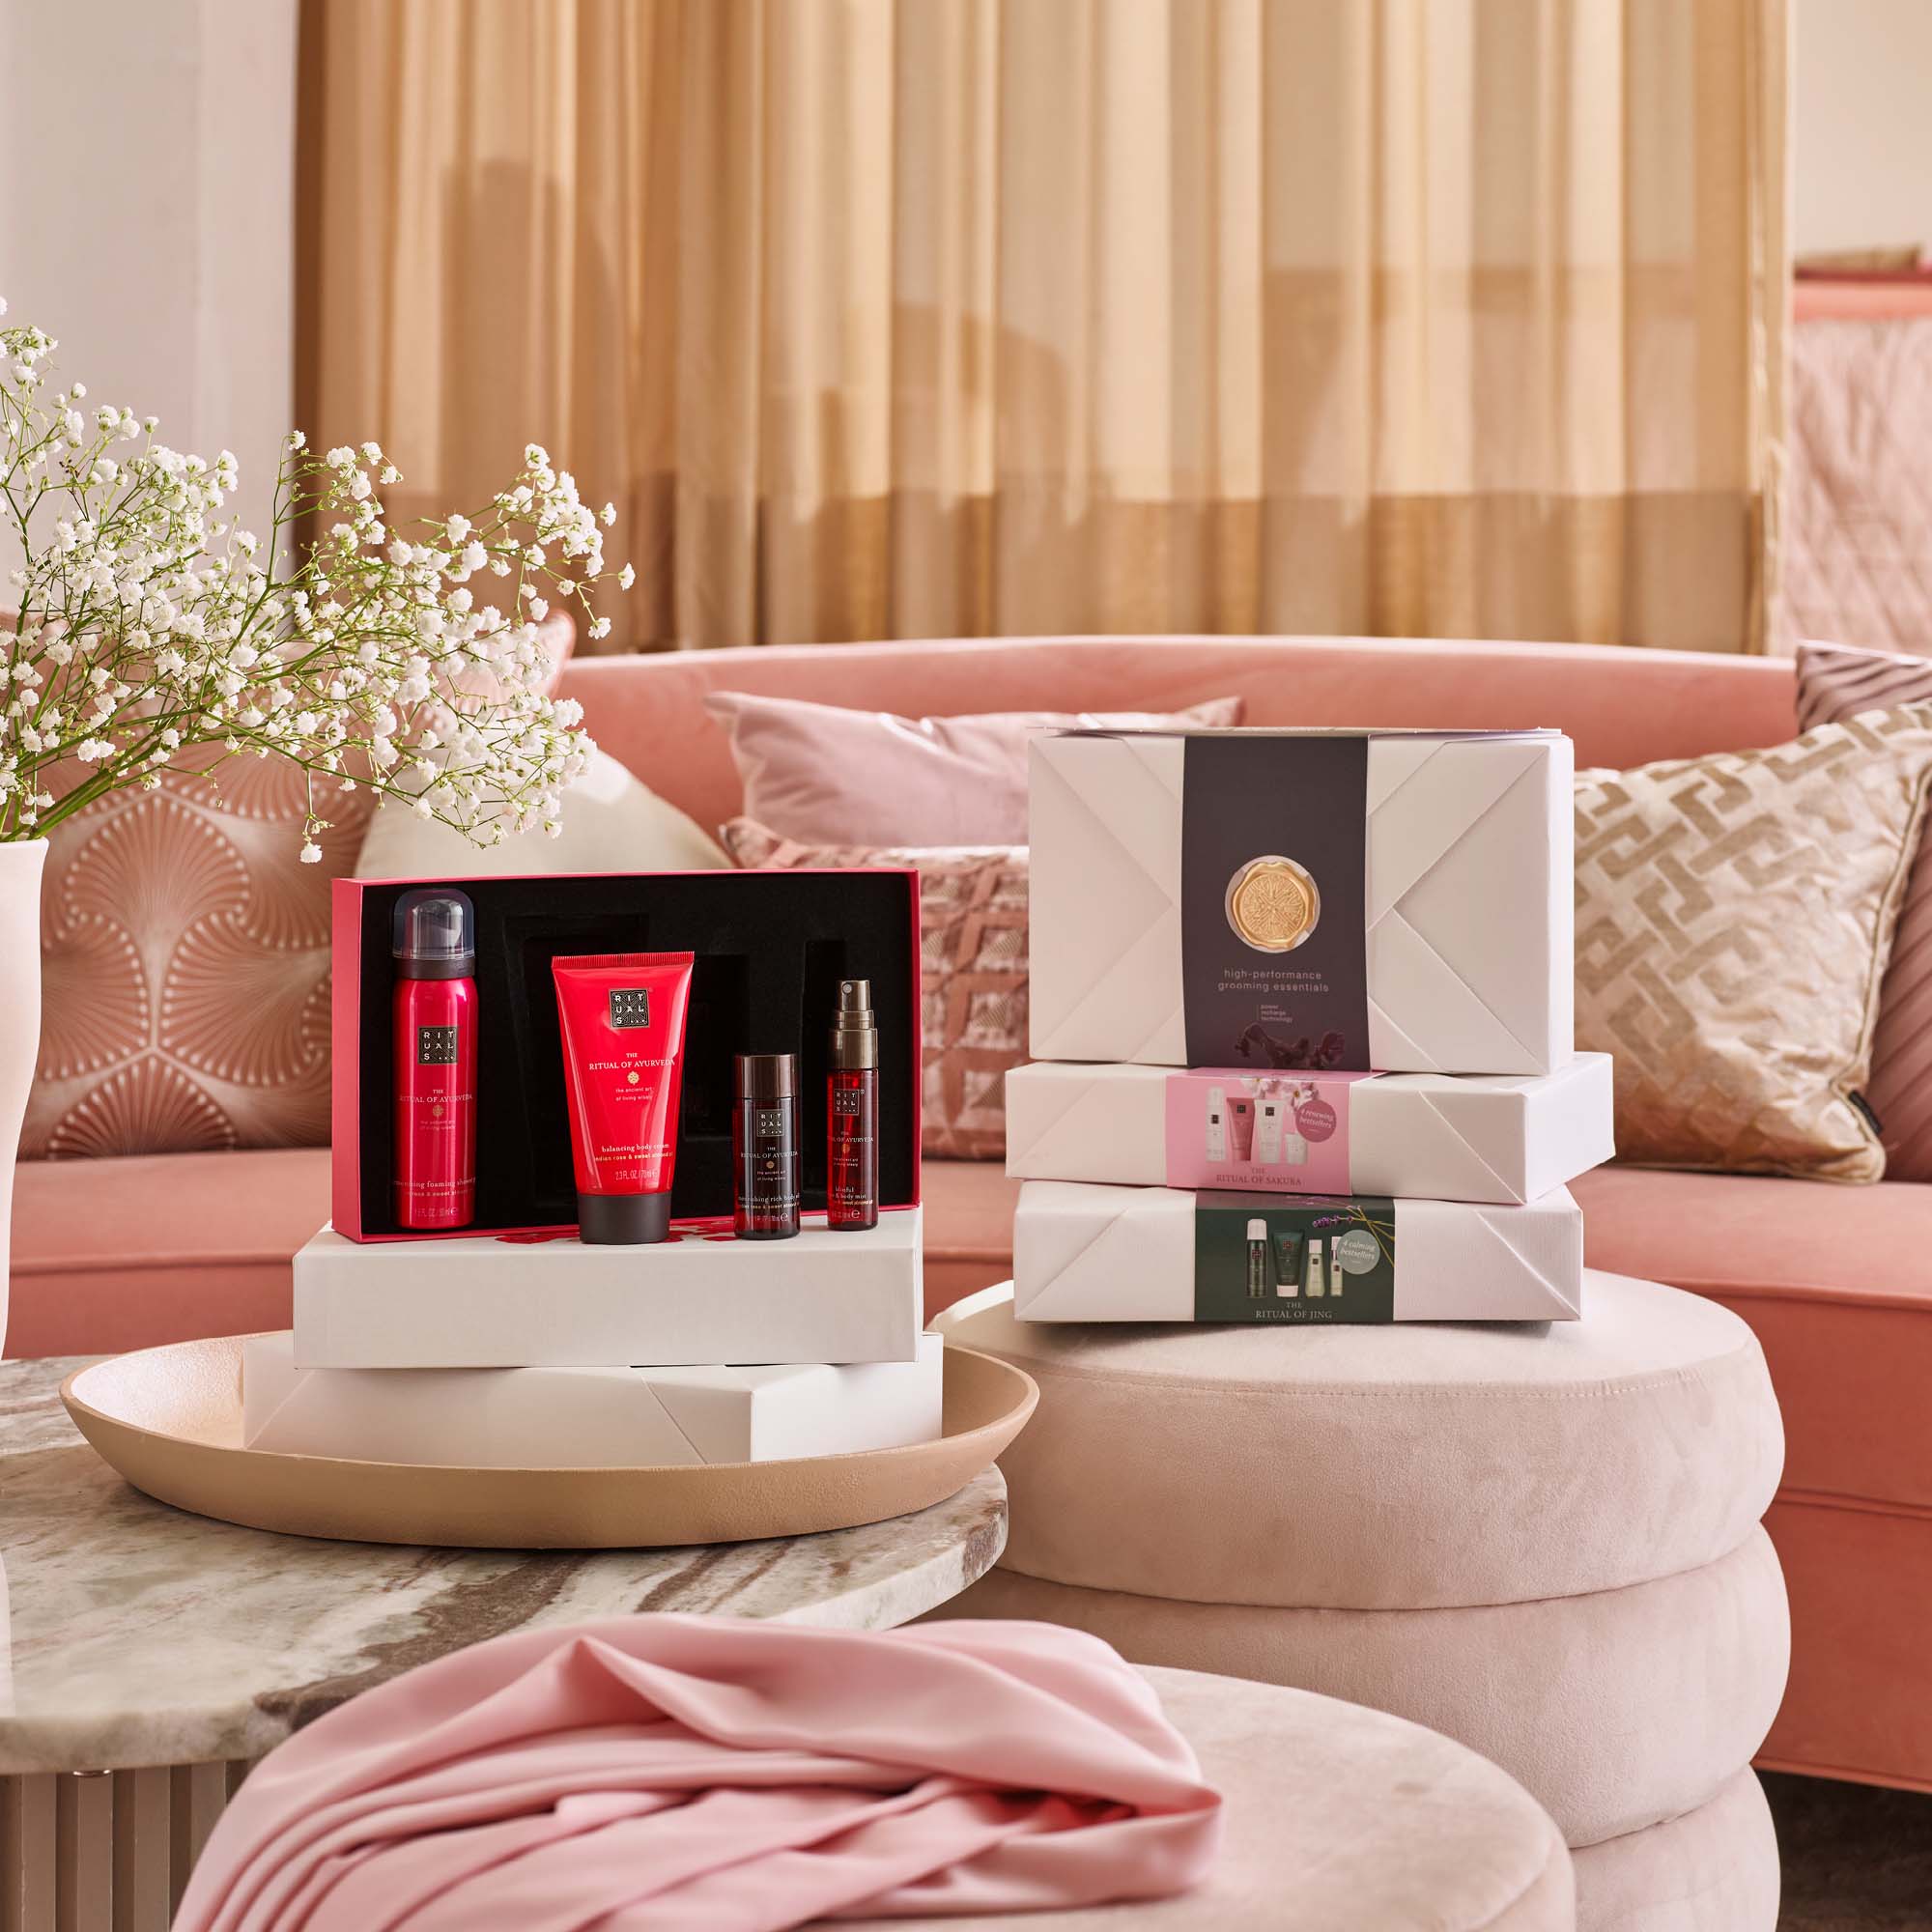 The Ritual of Jing - Small Gift Set by Rituals - Happy Box London -  Inspiring Gifts, Delivering Happiness